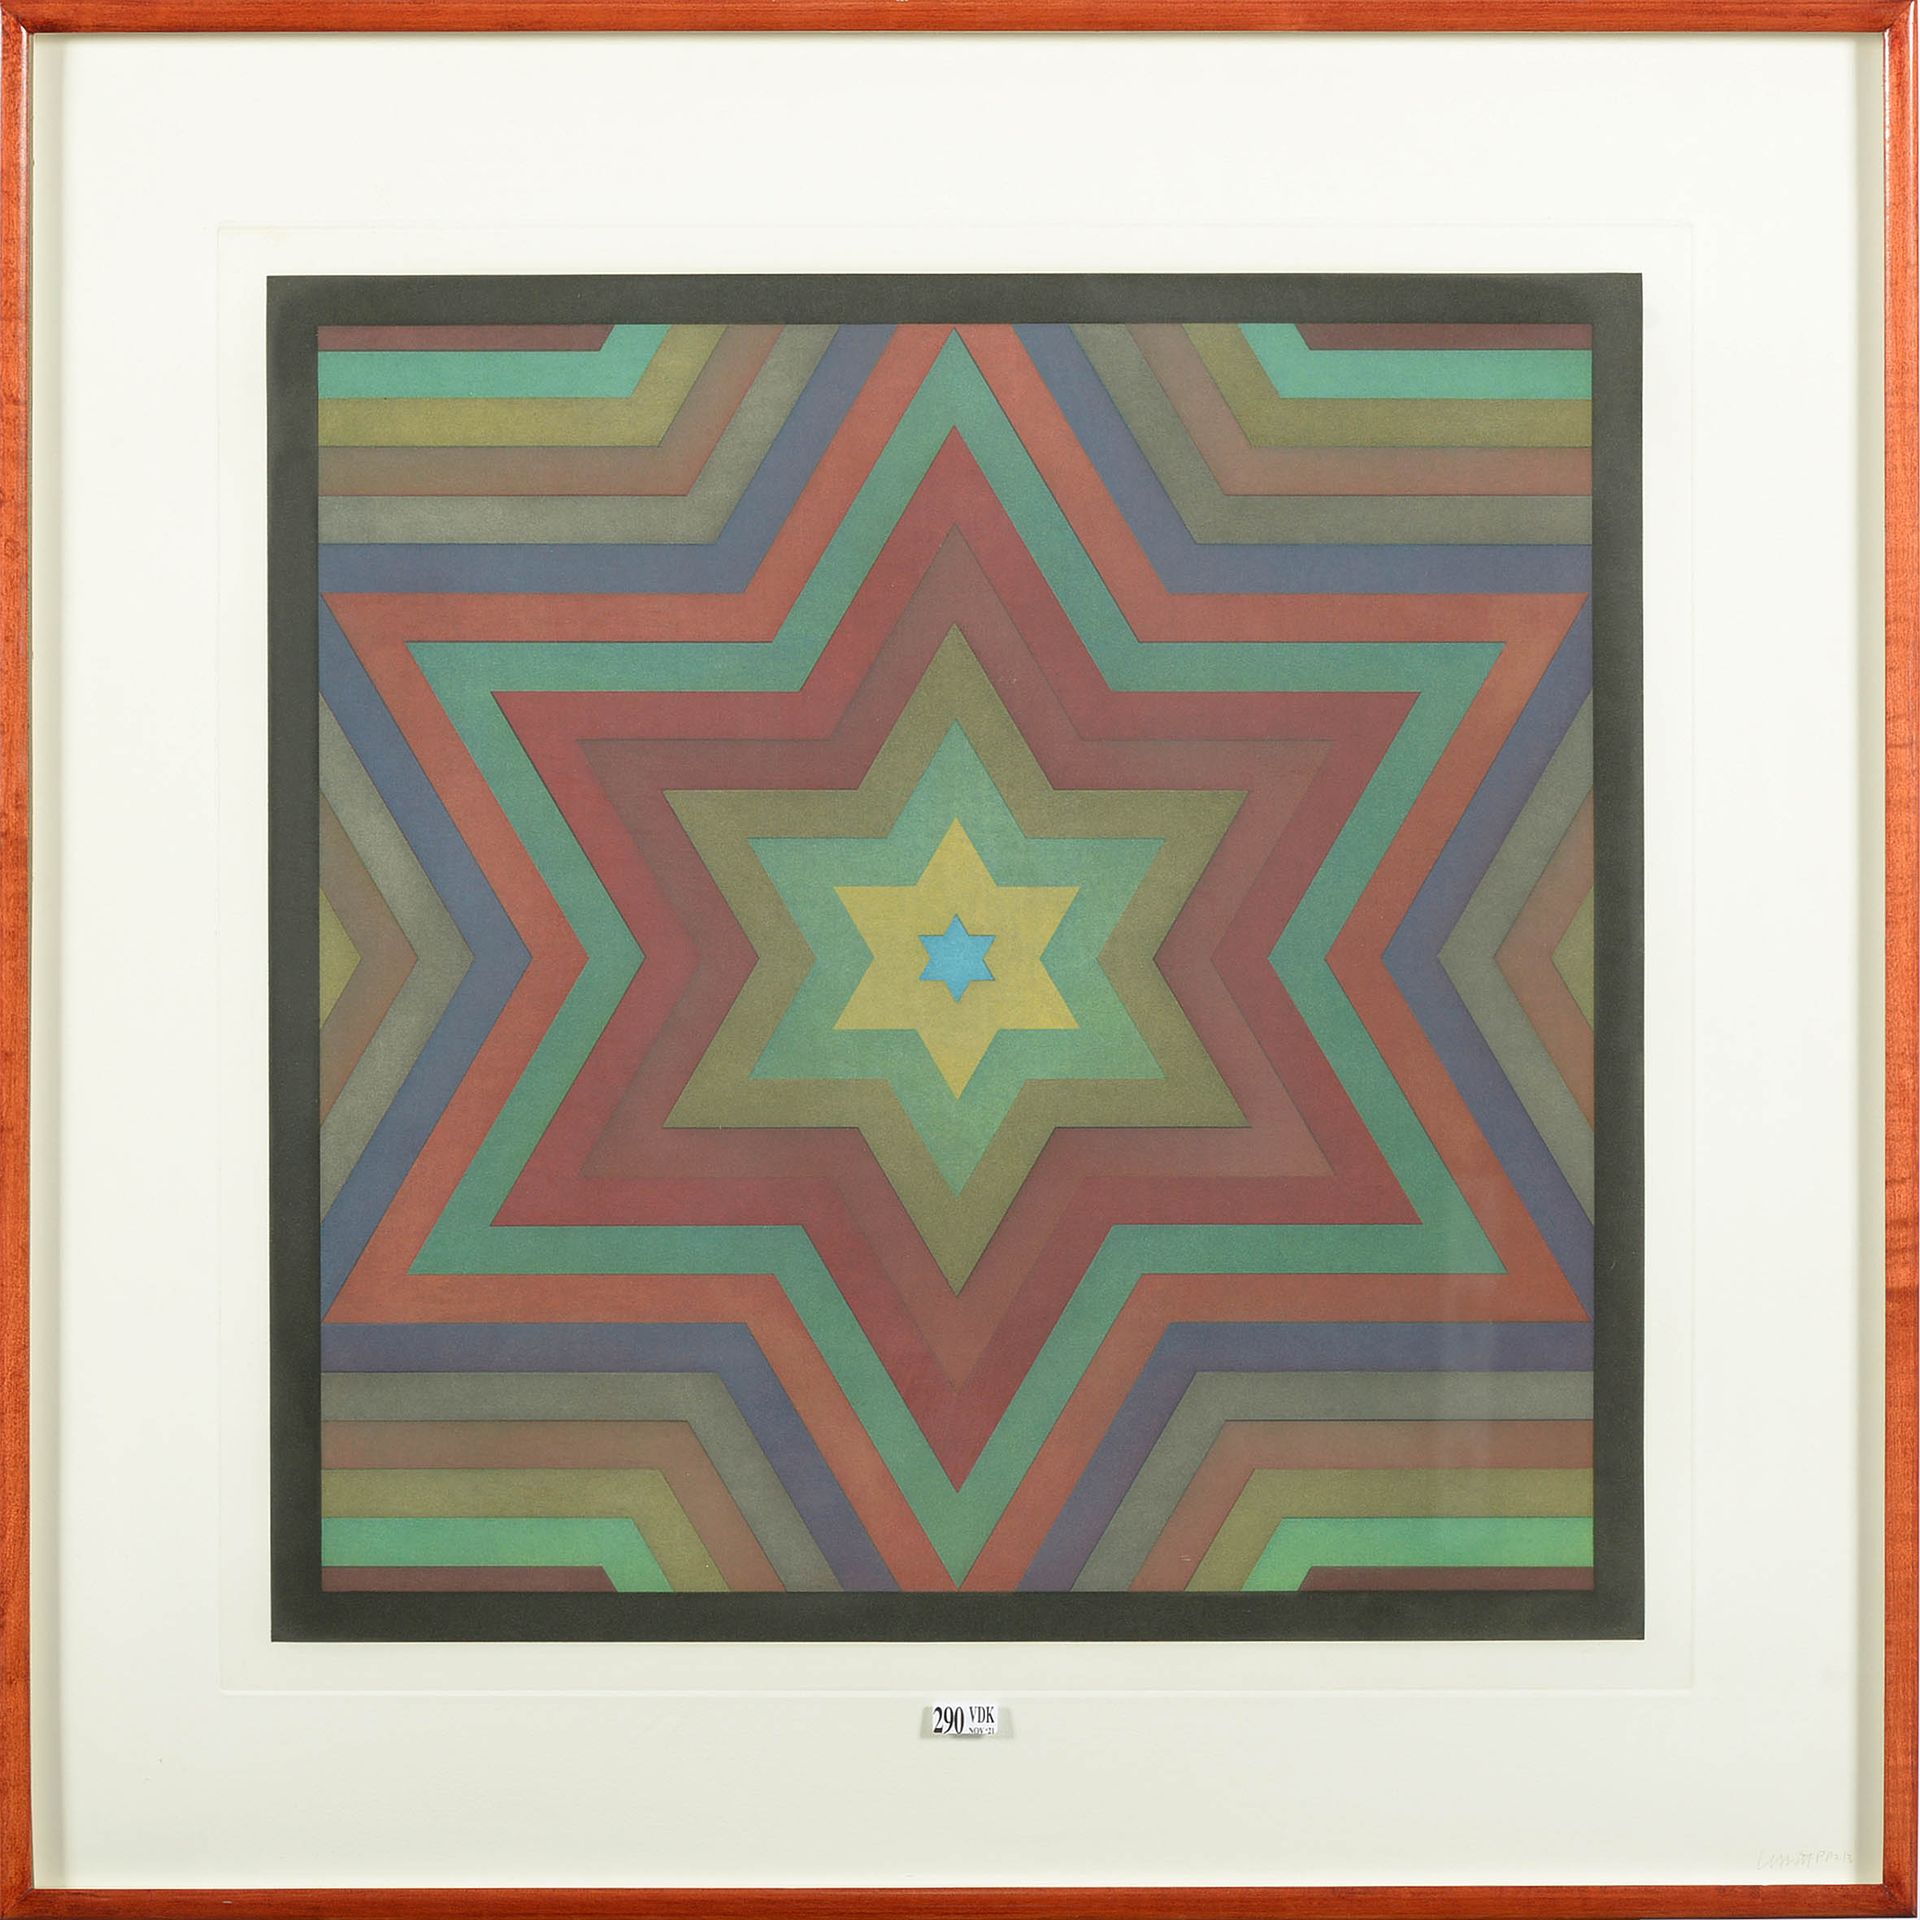 LEWITT Sol (1928 - 2007) "Stars" aquatint in colours on paper. Signed lower righ&hellip;